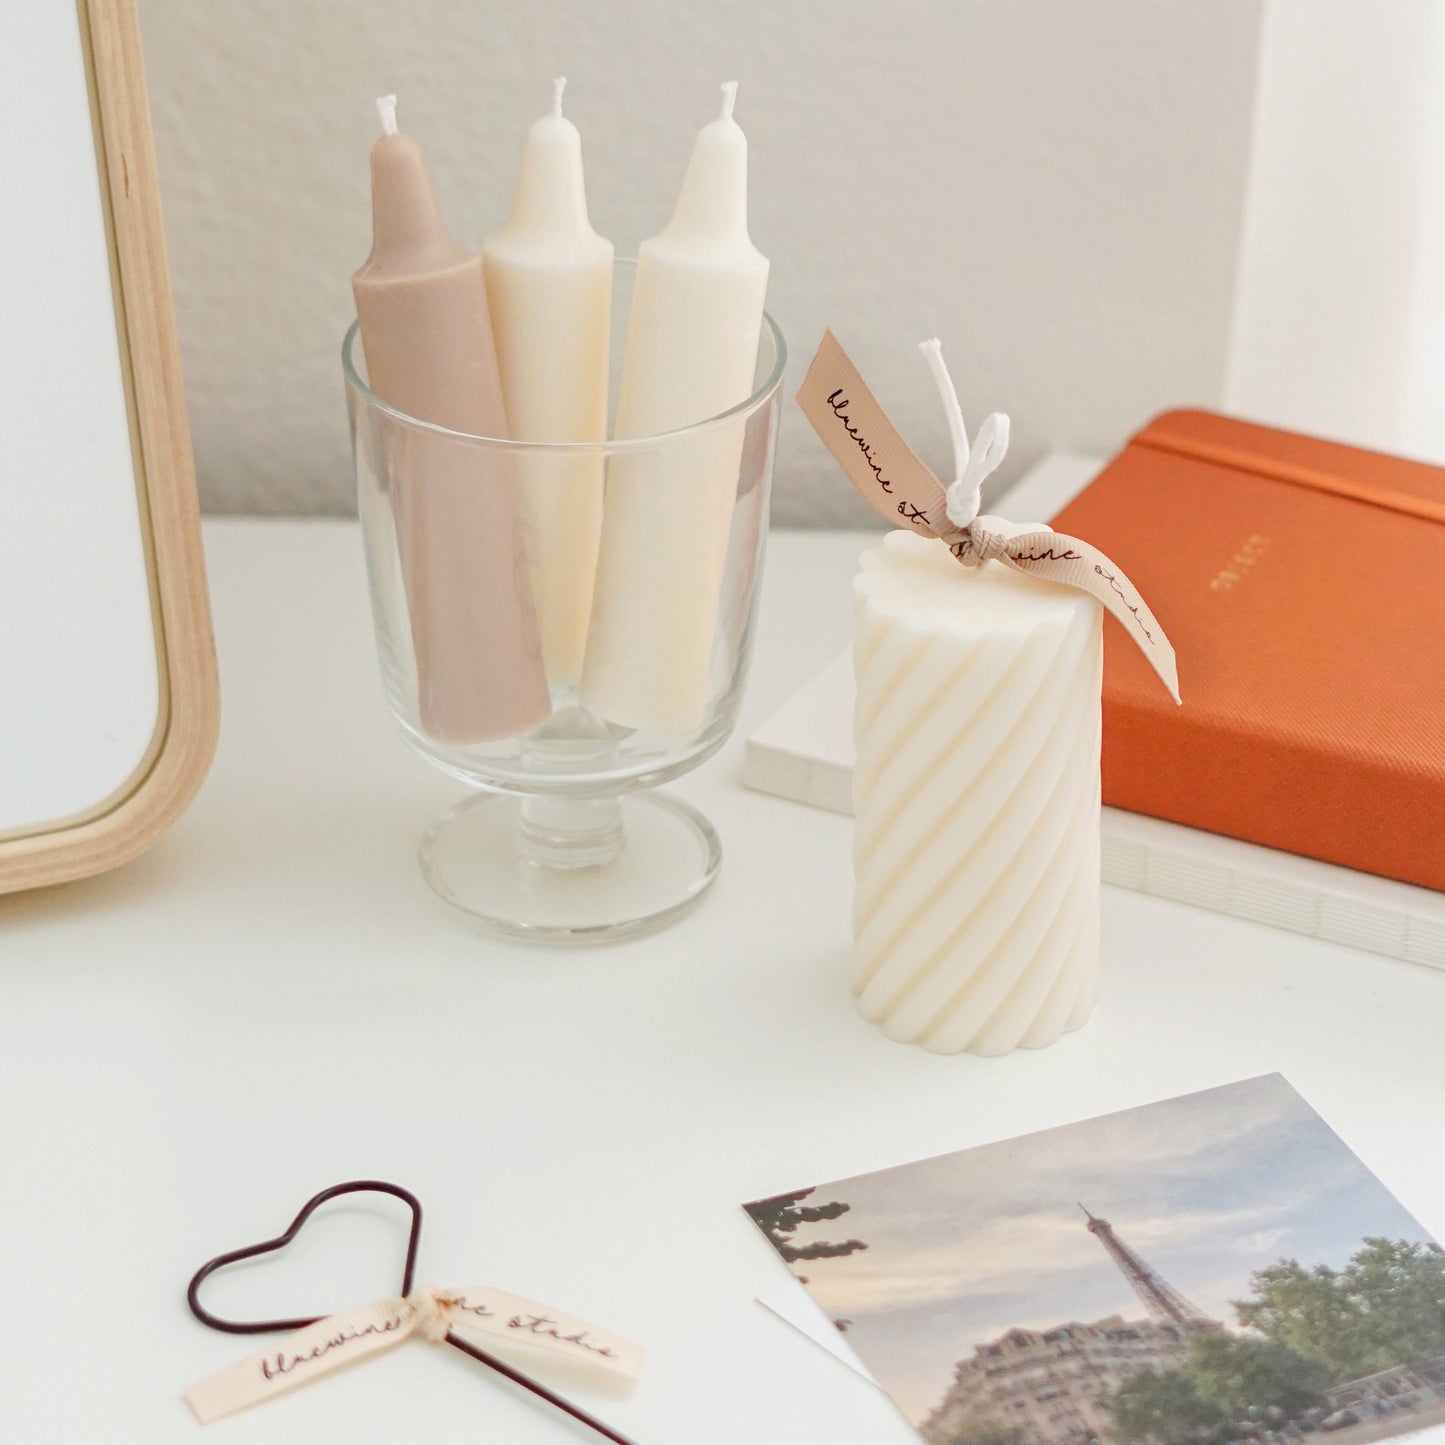 three crayon shape soy pillar candles in a glass, heart wick dipper, eiffel tower postcards, a spiral white soy pillar candle with a beige bluewine studio ribbon, orange planner, and ikea wood vanity mirror